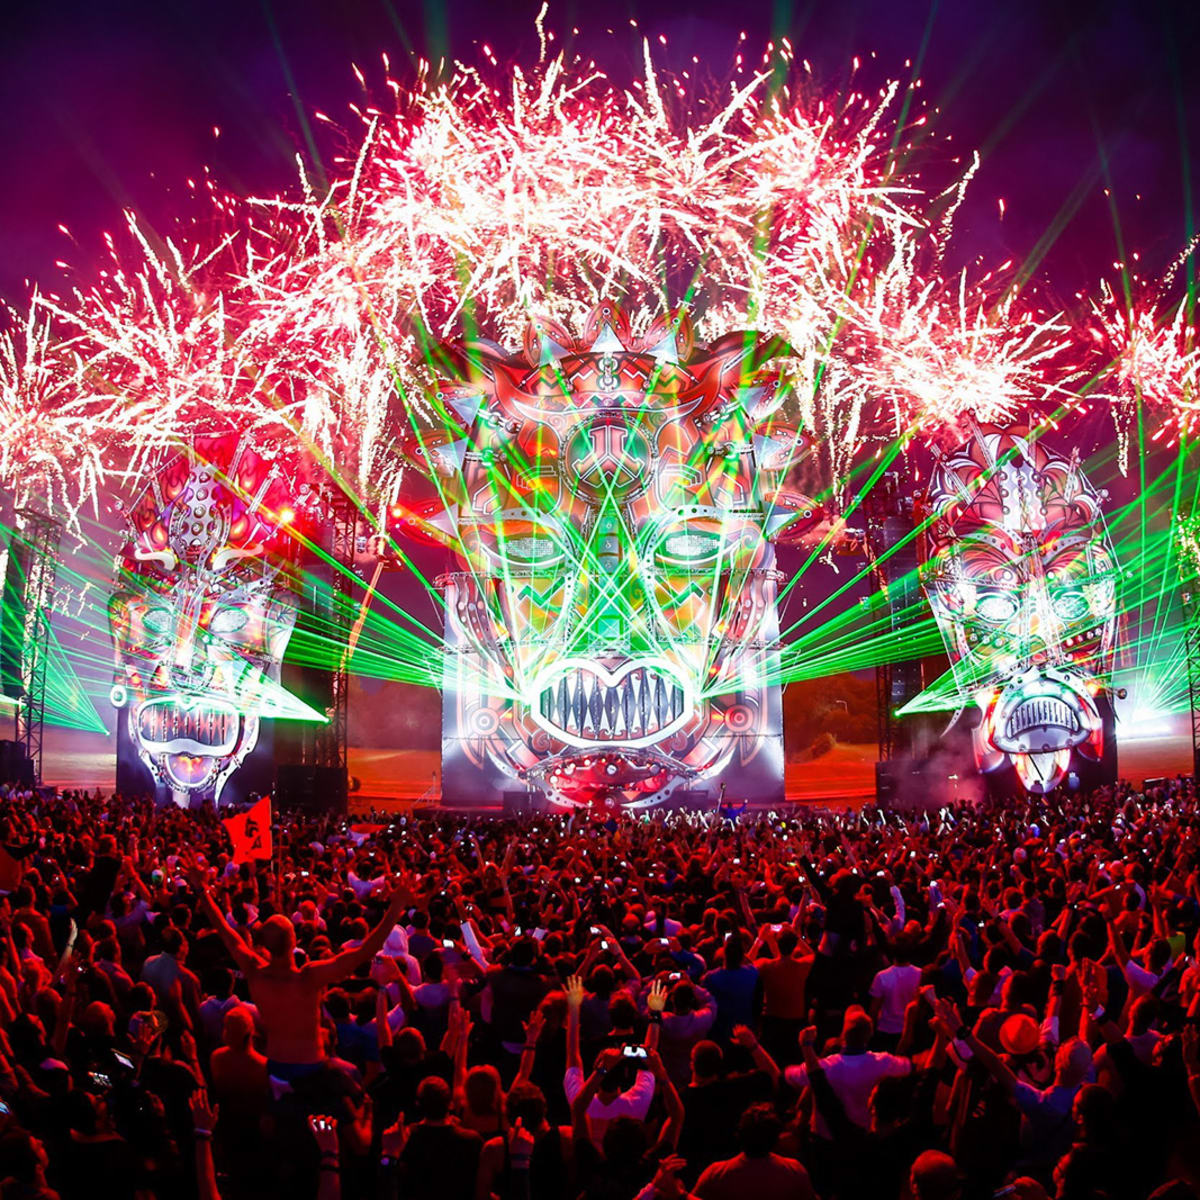 Glorious Pre Pandemic EDM Concert Moments For The Nostalgic.com Latest Electronic Dance Music News, Reviews & Artists